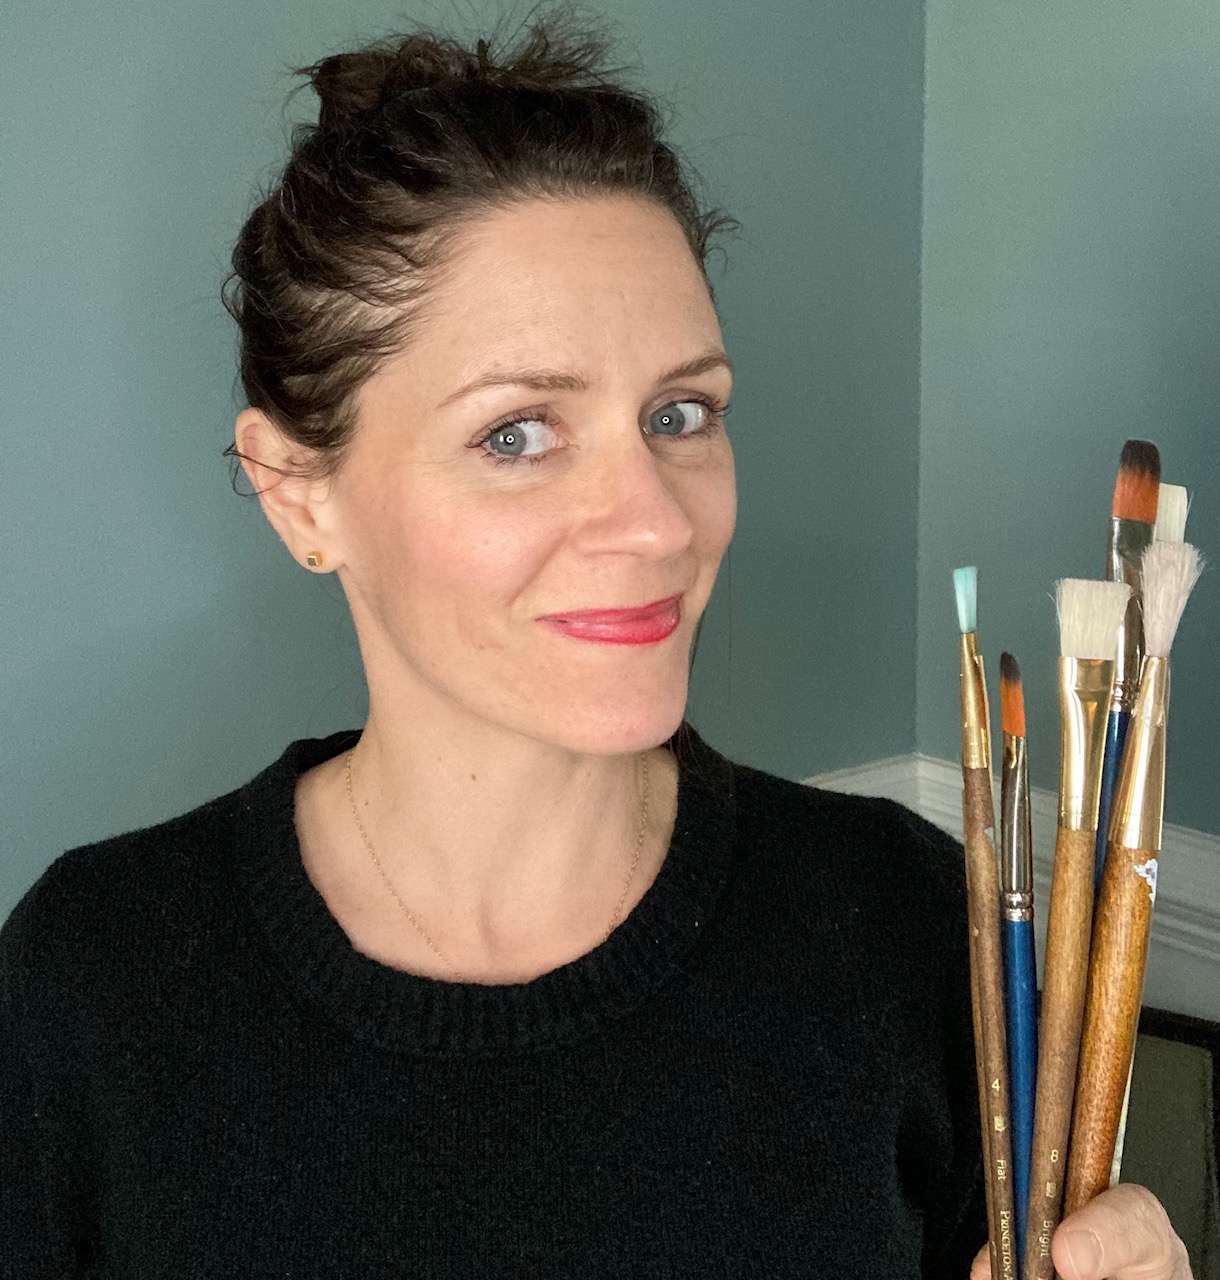 women in black sweater holds several paint brushes while smiling at camera